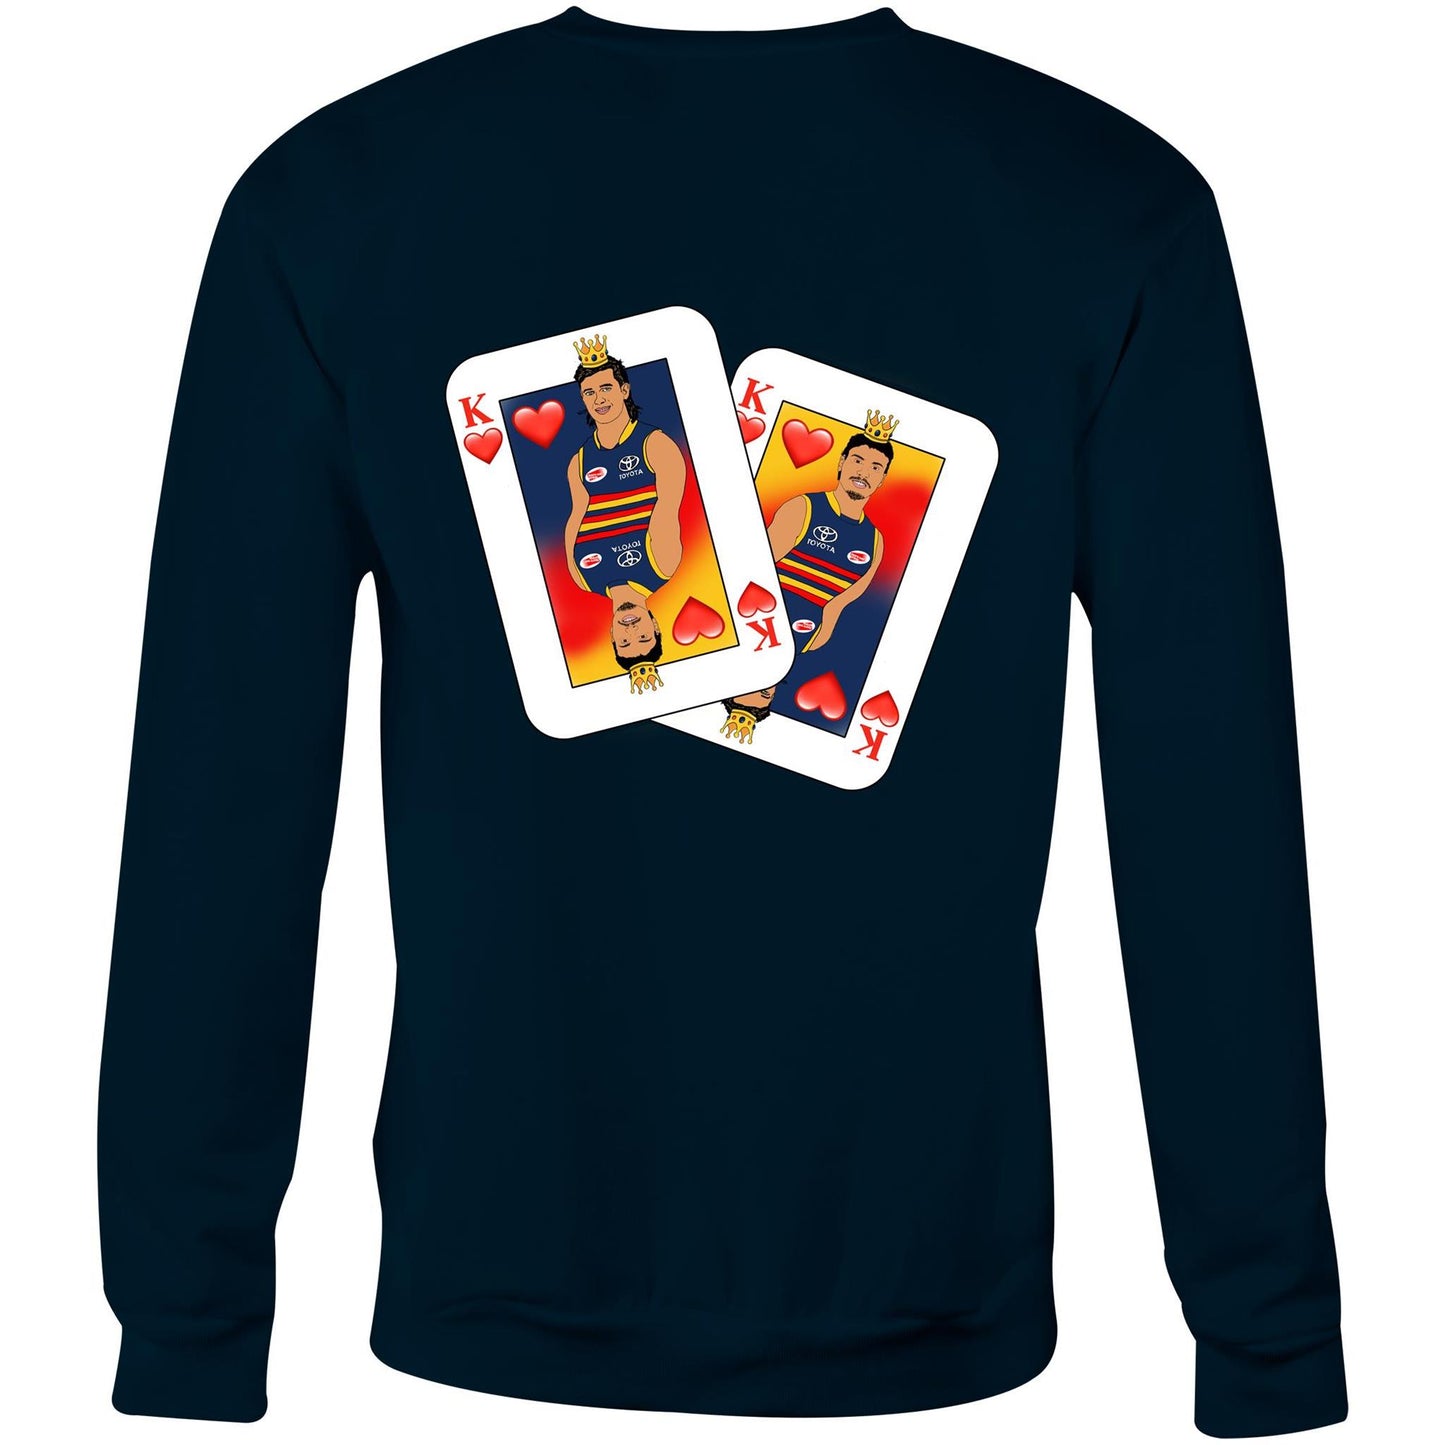 King of Hearts - Sweater